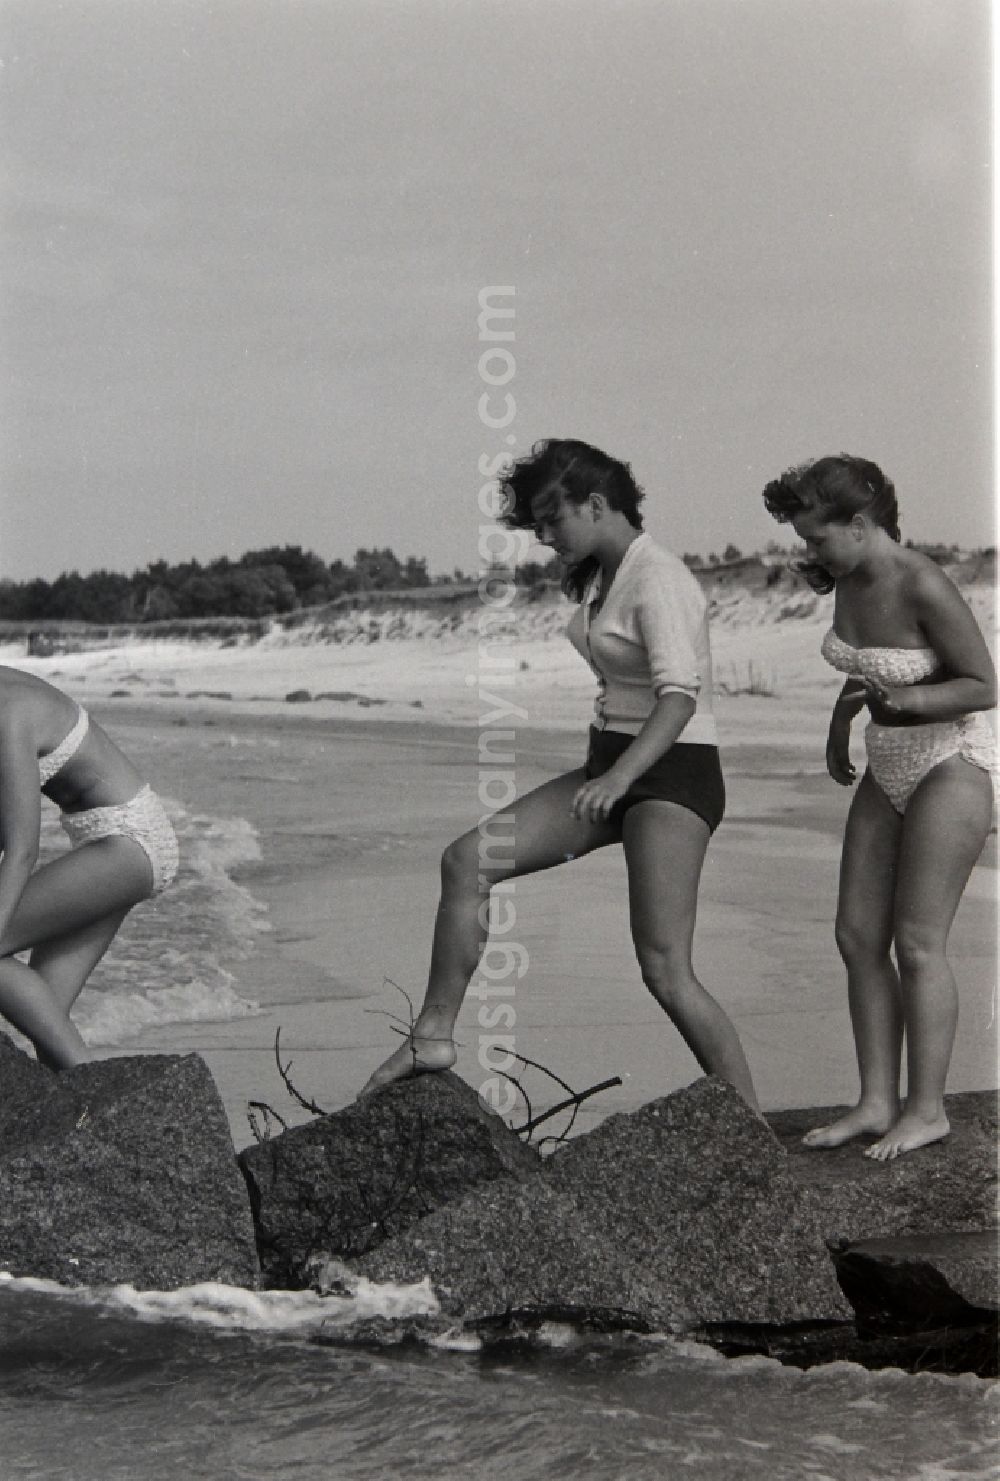 GDR photo archive: Prerow - Beach activity and recreation on the Baltic Sea beach in Prerow in the state Mecklenburg-Western Pomerania on the territory of the former GDR, German Democratic Republic